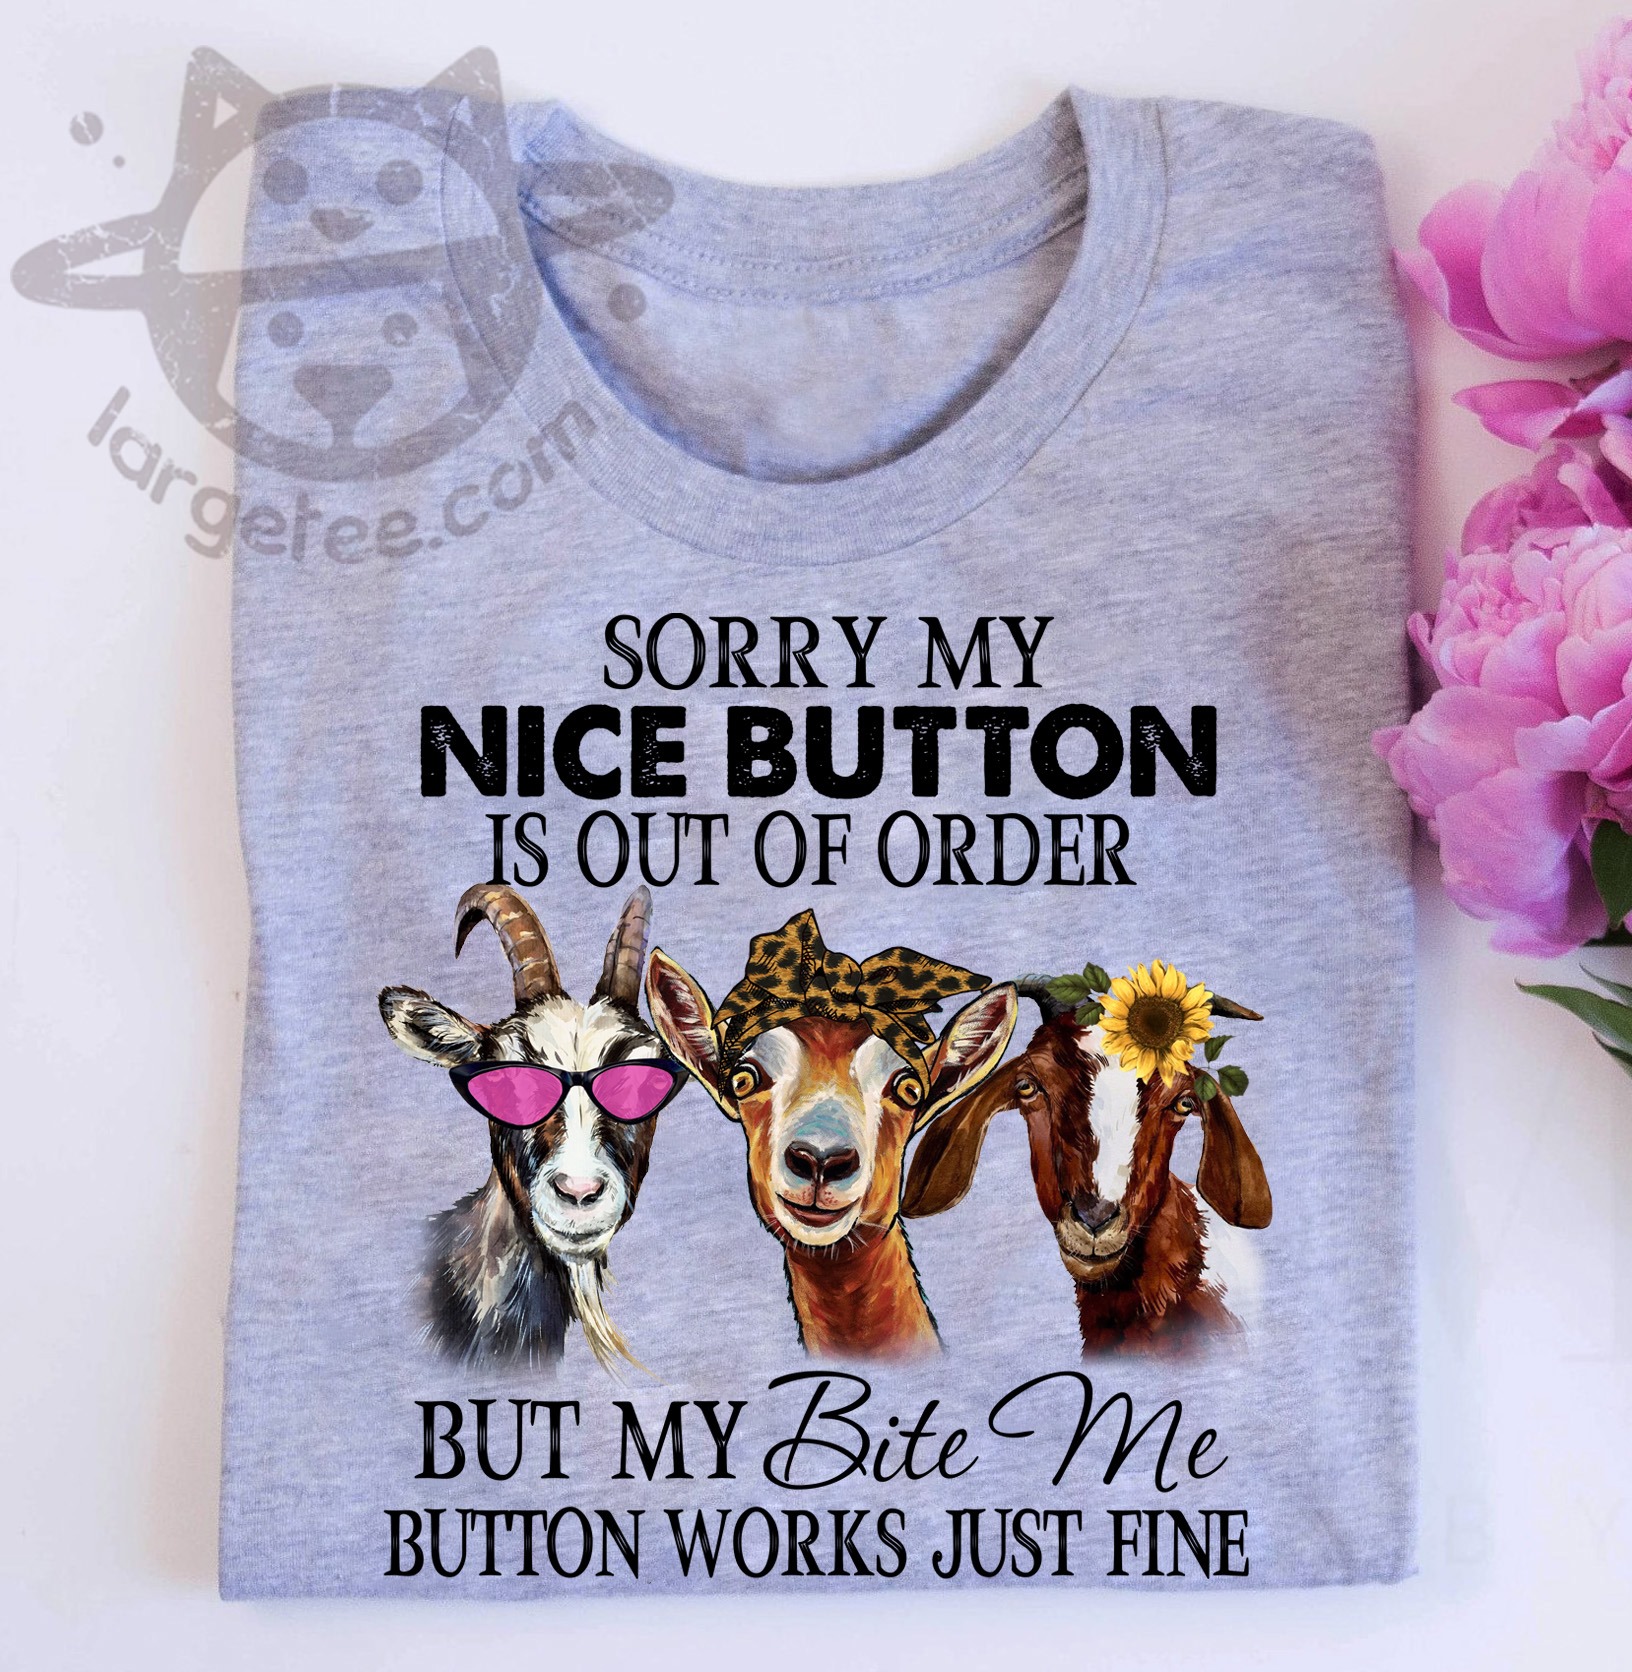 Sorry my nice button is out of order but my bite me button works just fine